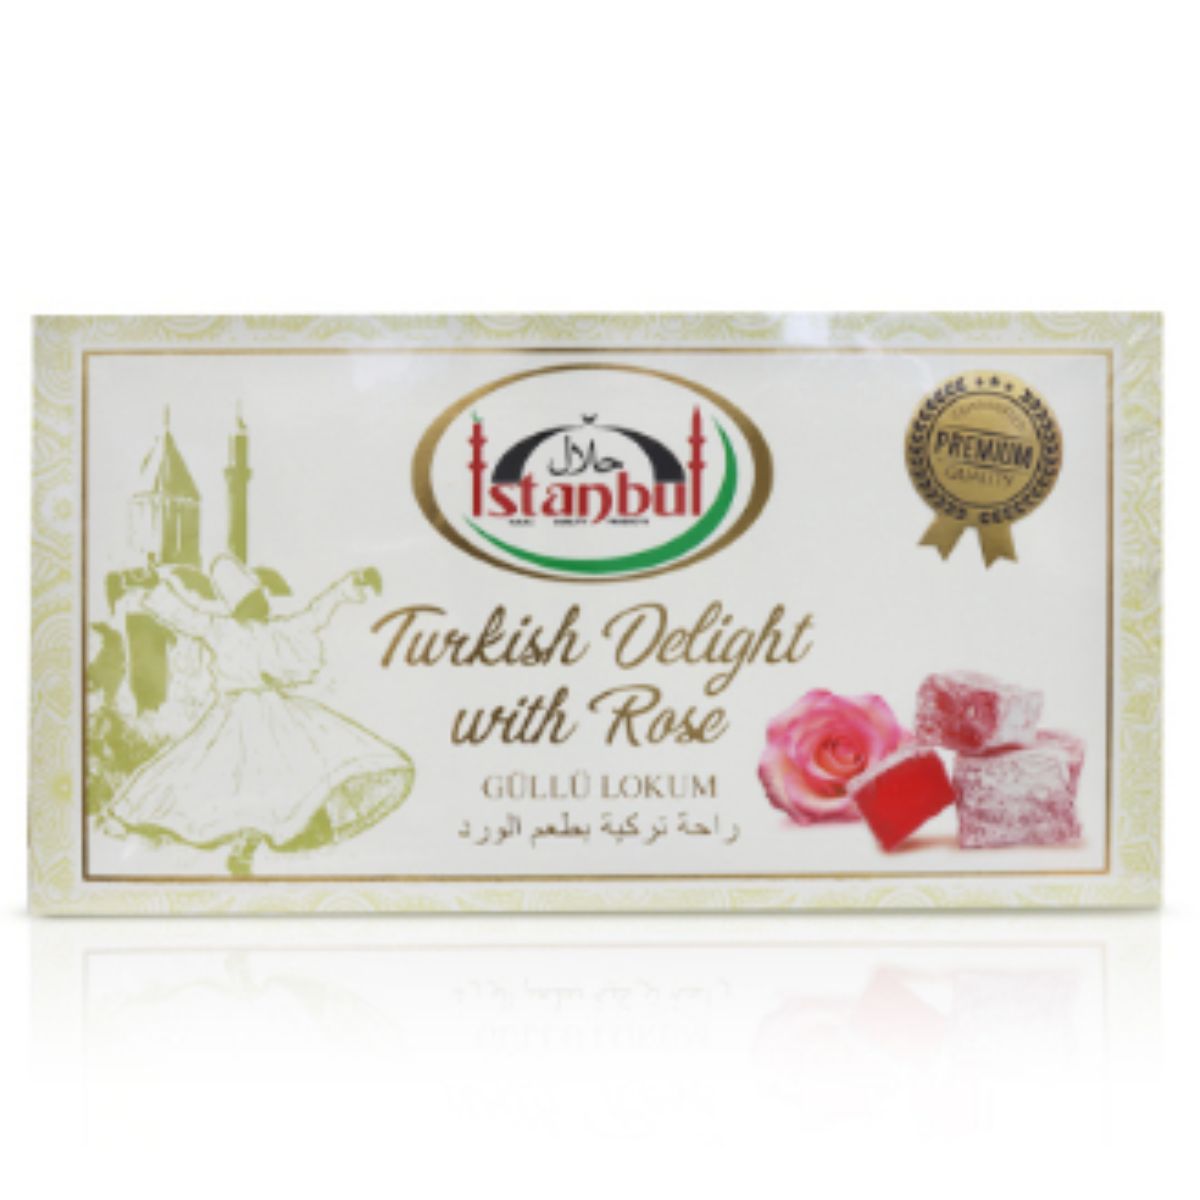 Istanbul - Turkish Delight with Rose - 350g with rose.